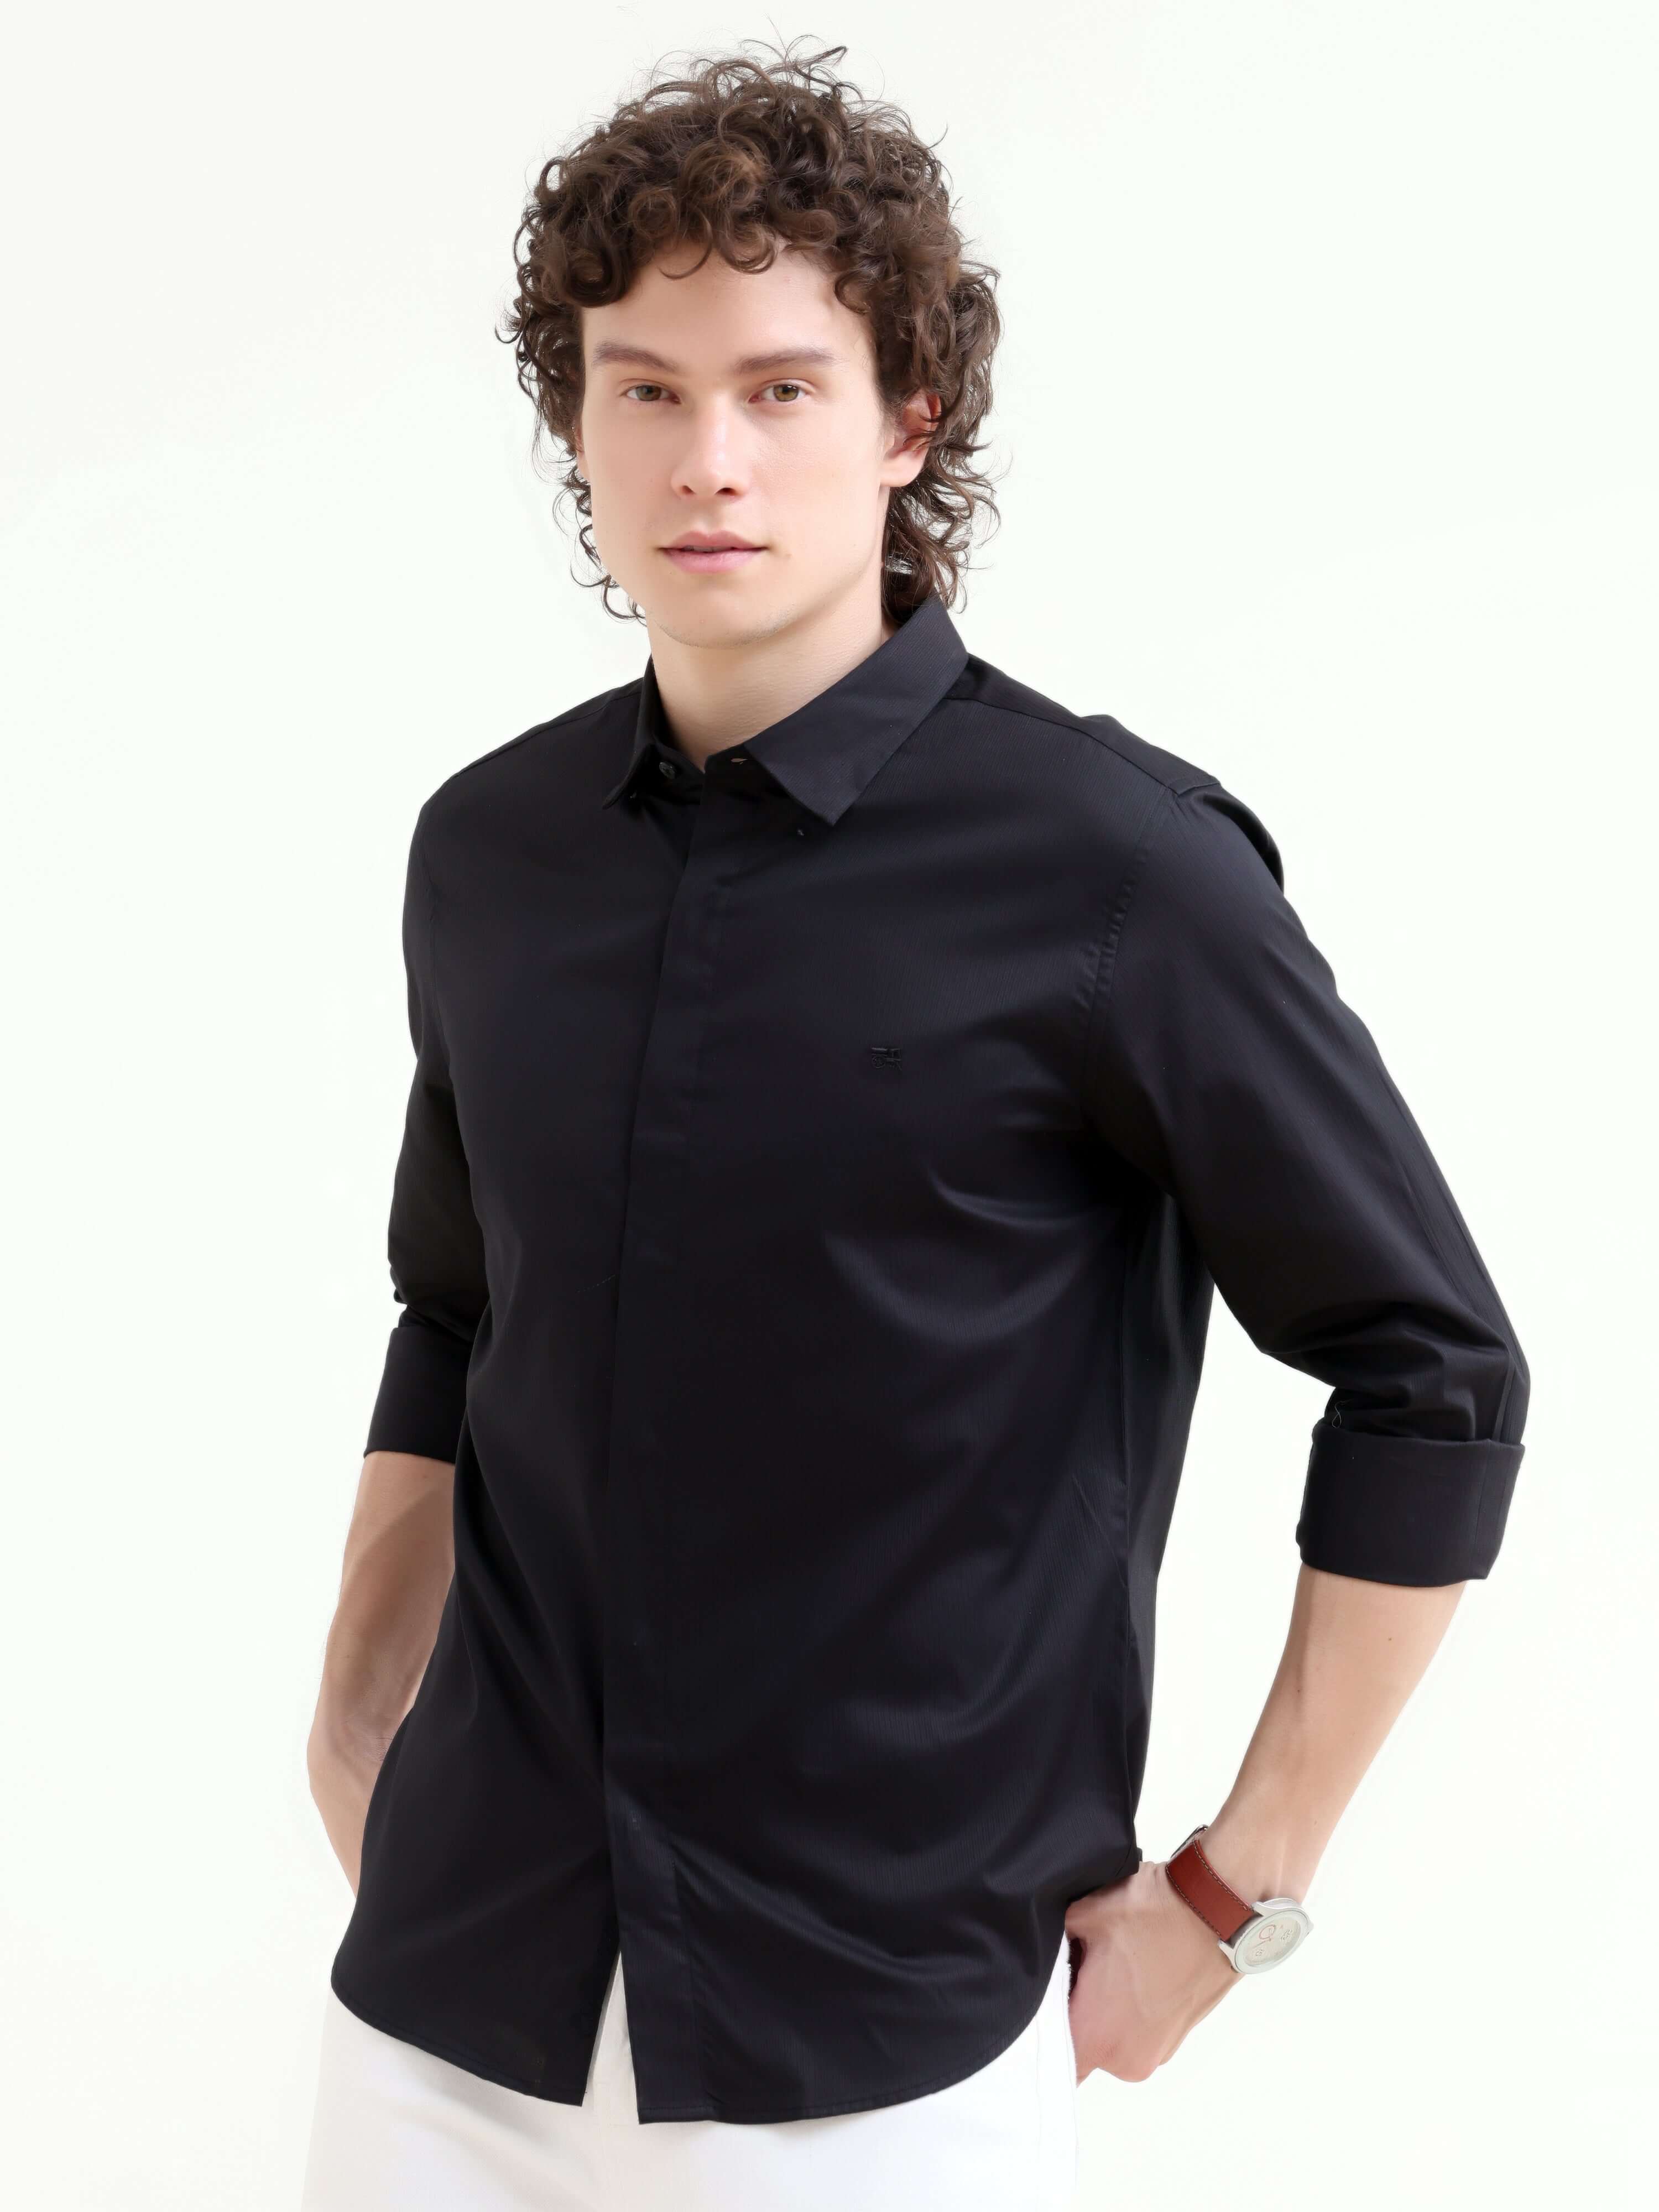 Guild Business Black Shirt - New Men's Summer Essential shop online at Estilocus. Elevate your style with the new Guild black shirt. Perfect blend of elegance & comfort for your summer wardrobe. Shop now!